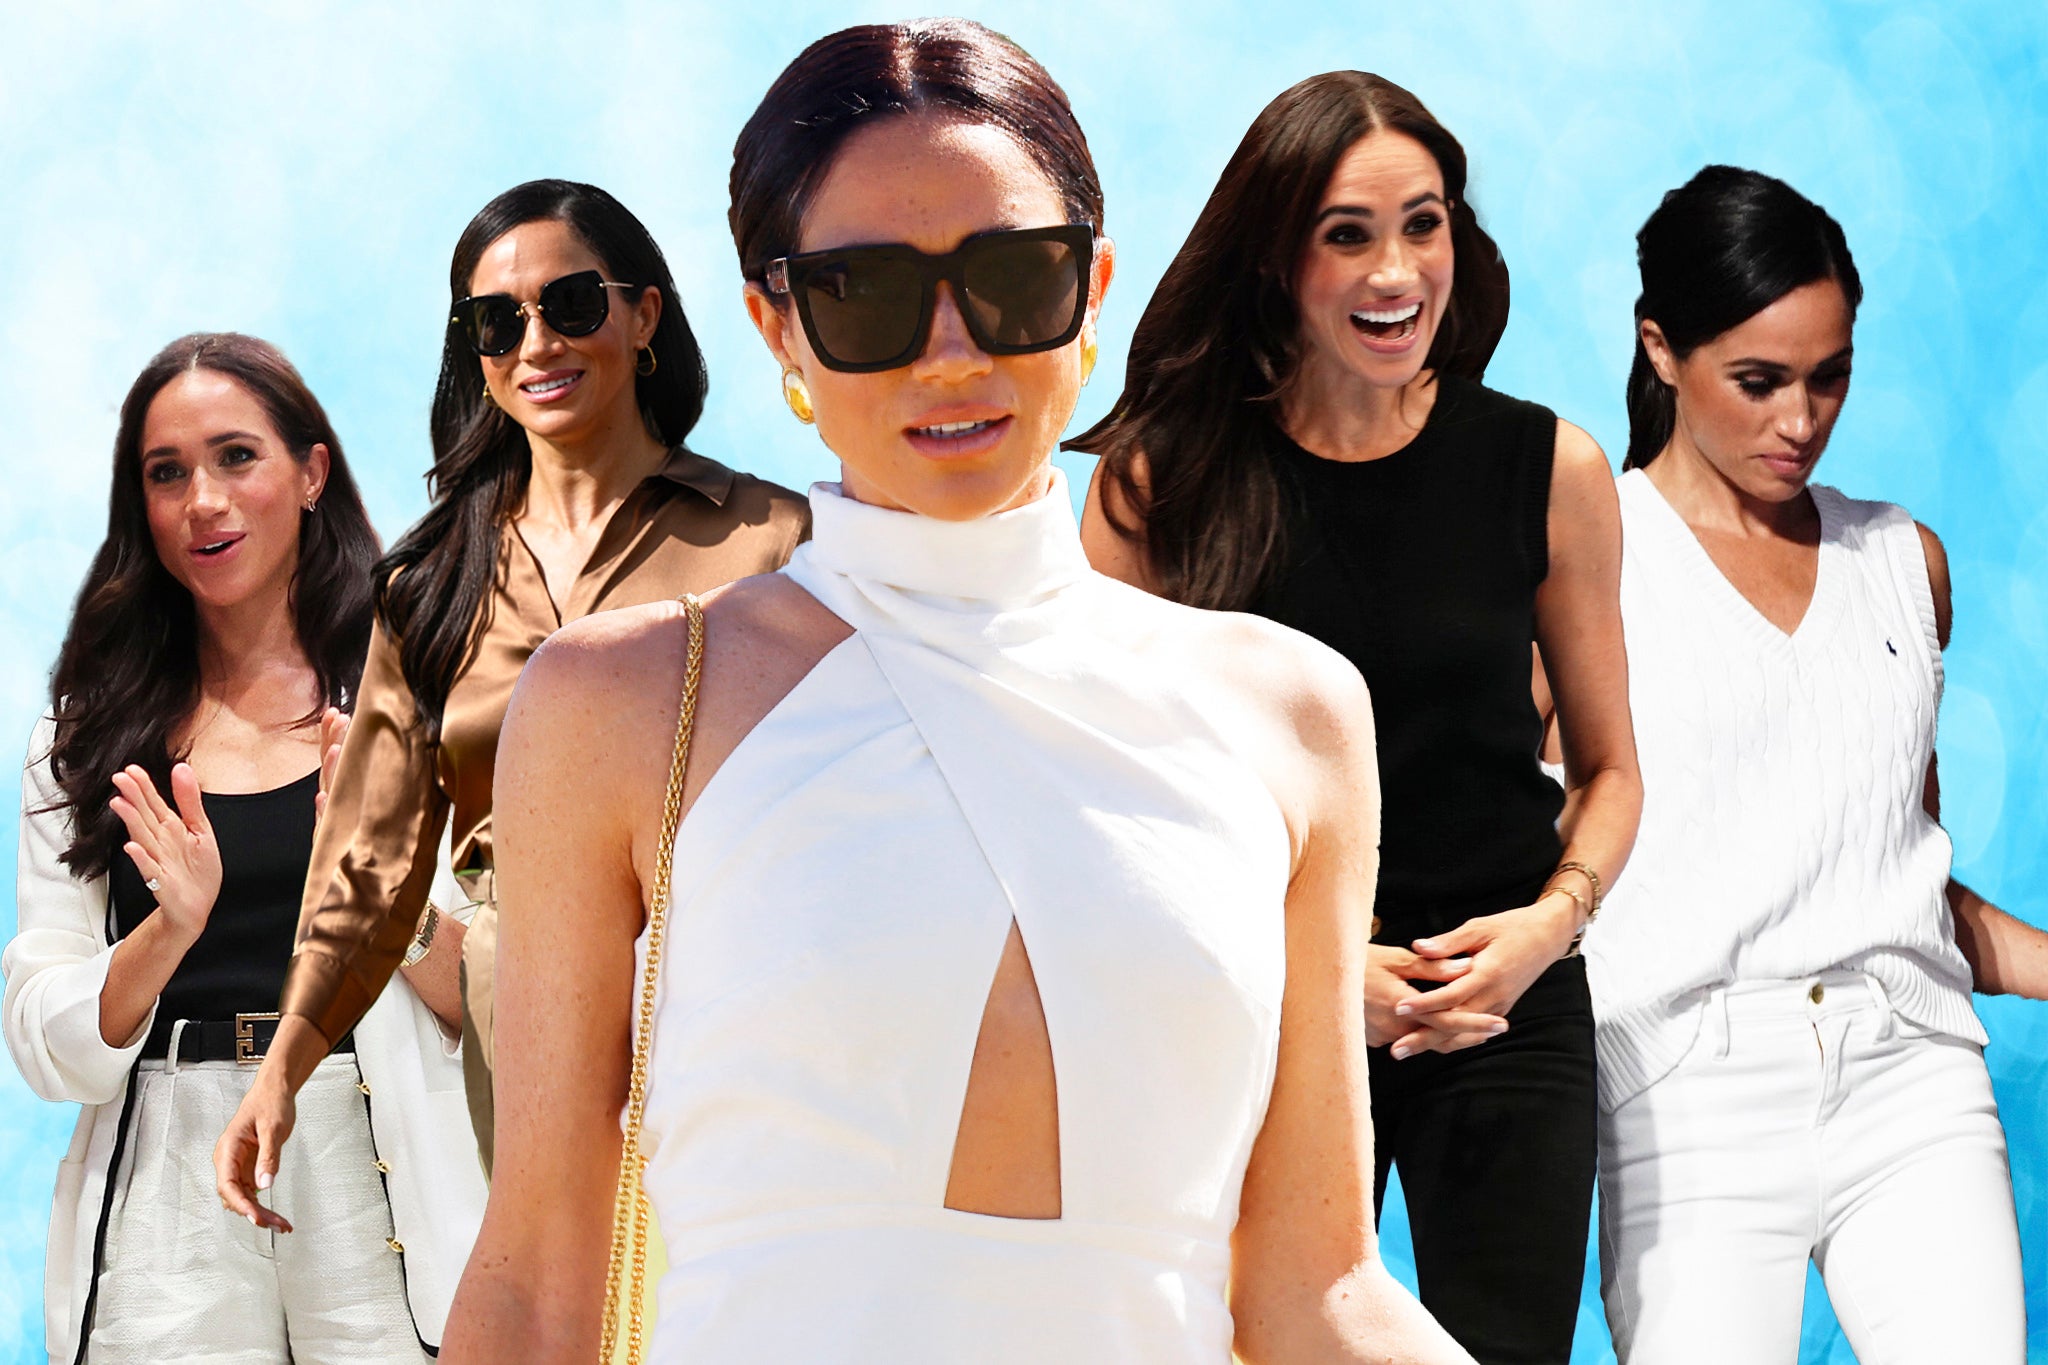 ‘The Meghan’ is a chic signature look that works in the real world